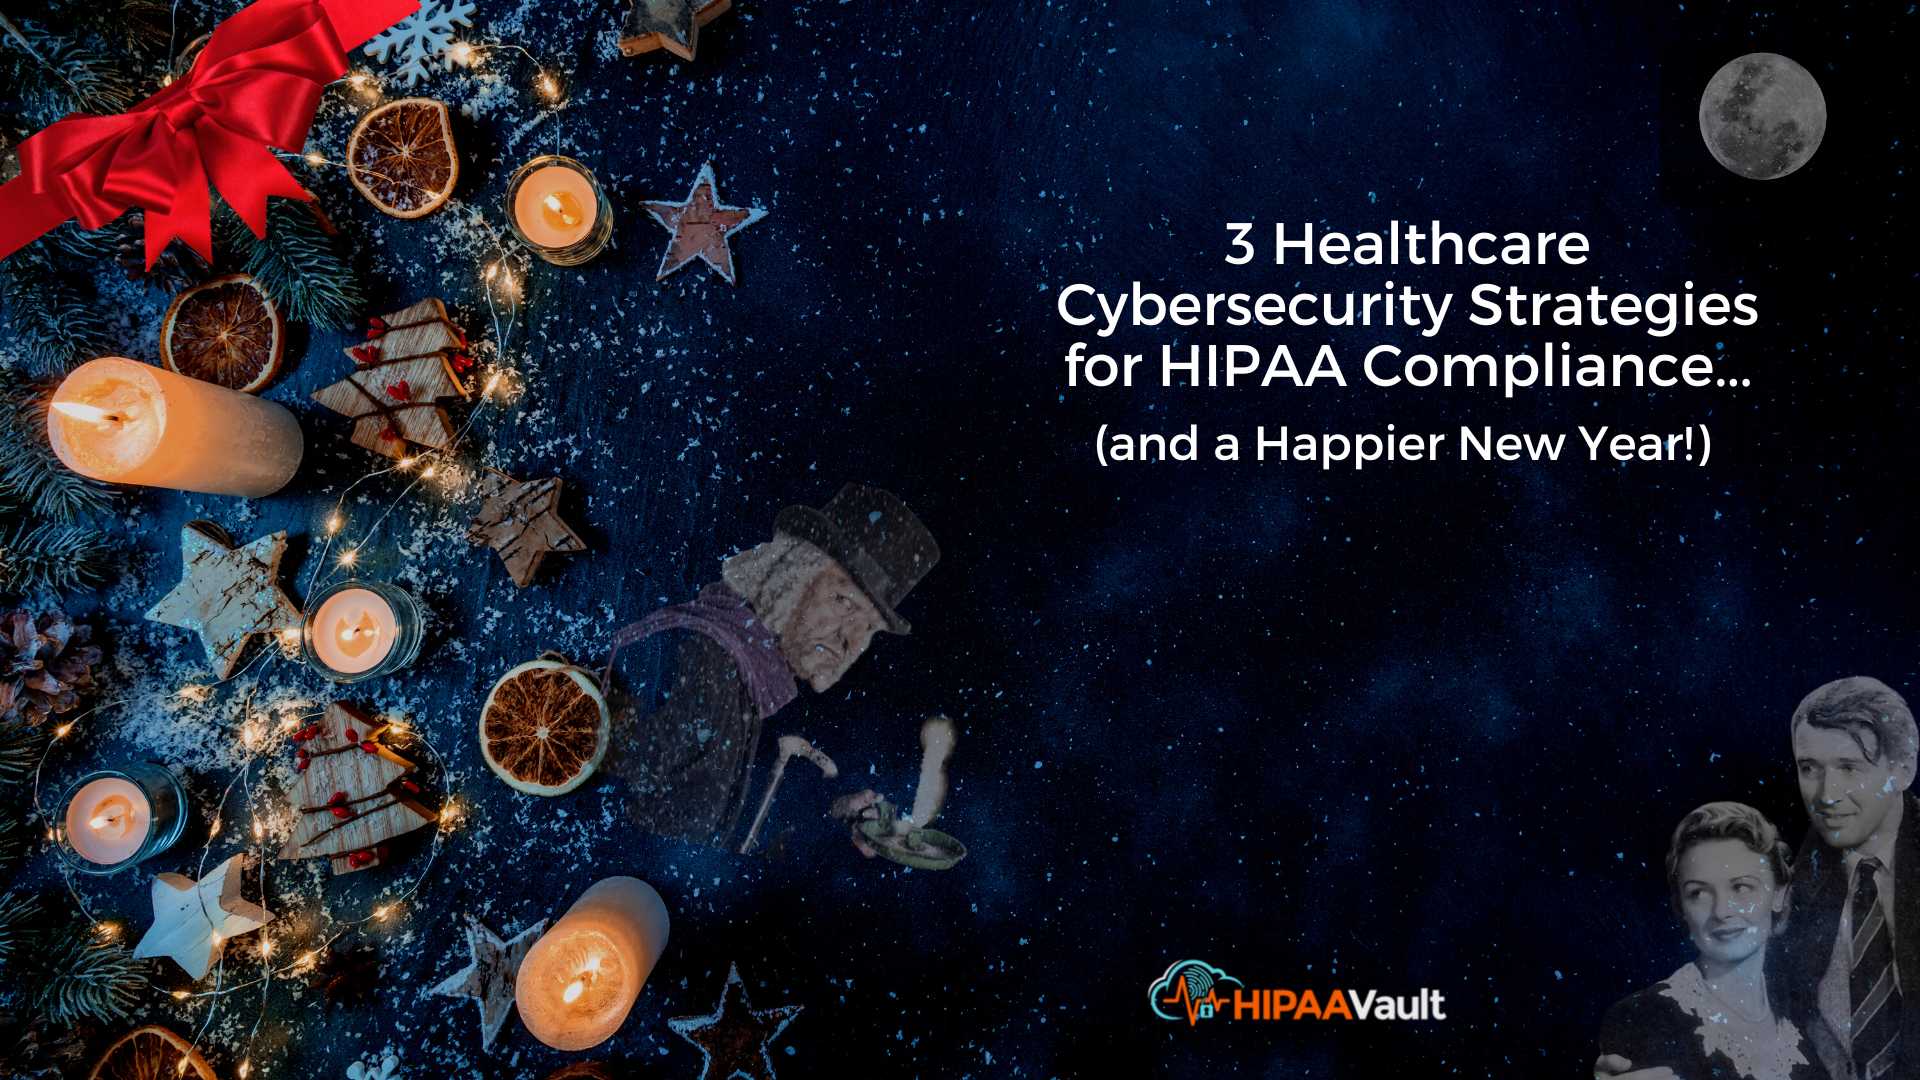 3 Healthcare Cybersecurity Strategies for Achieving HIPAA Compliance…